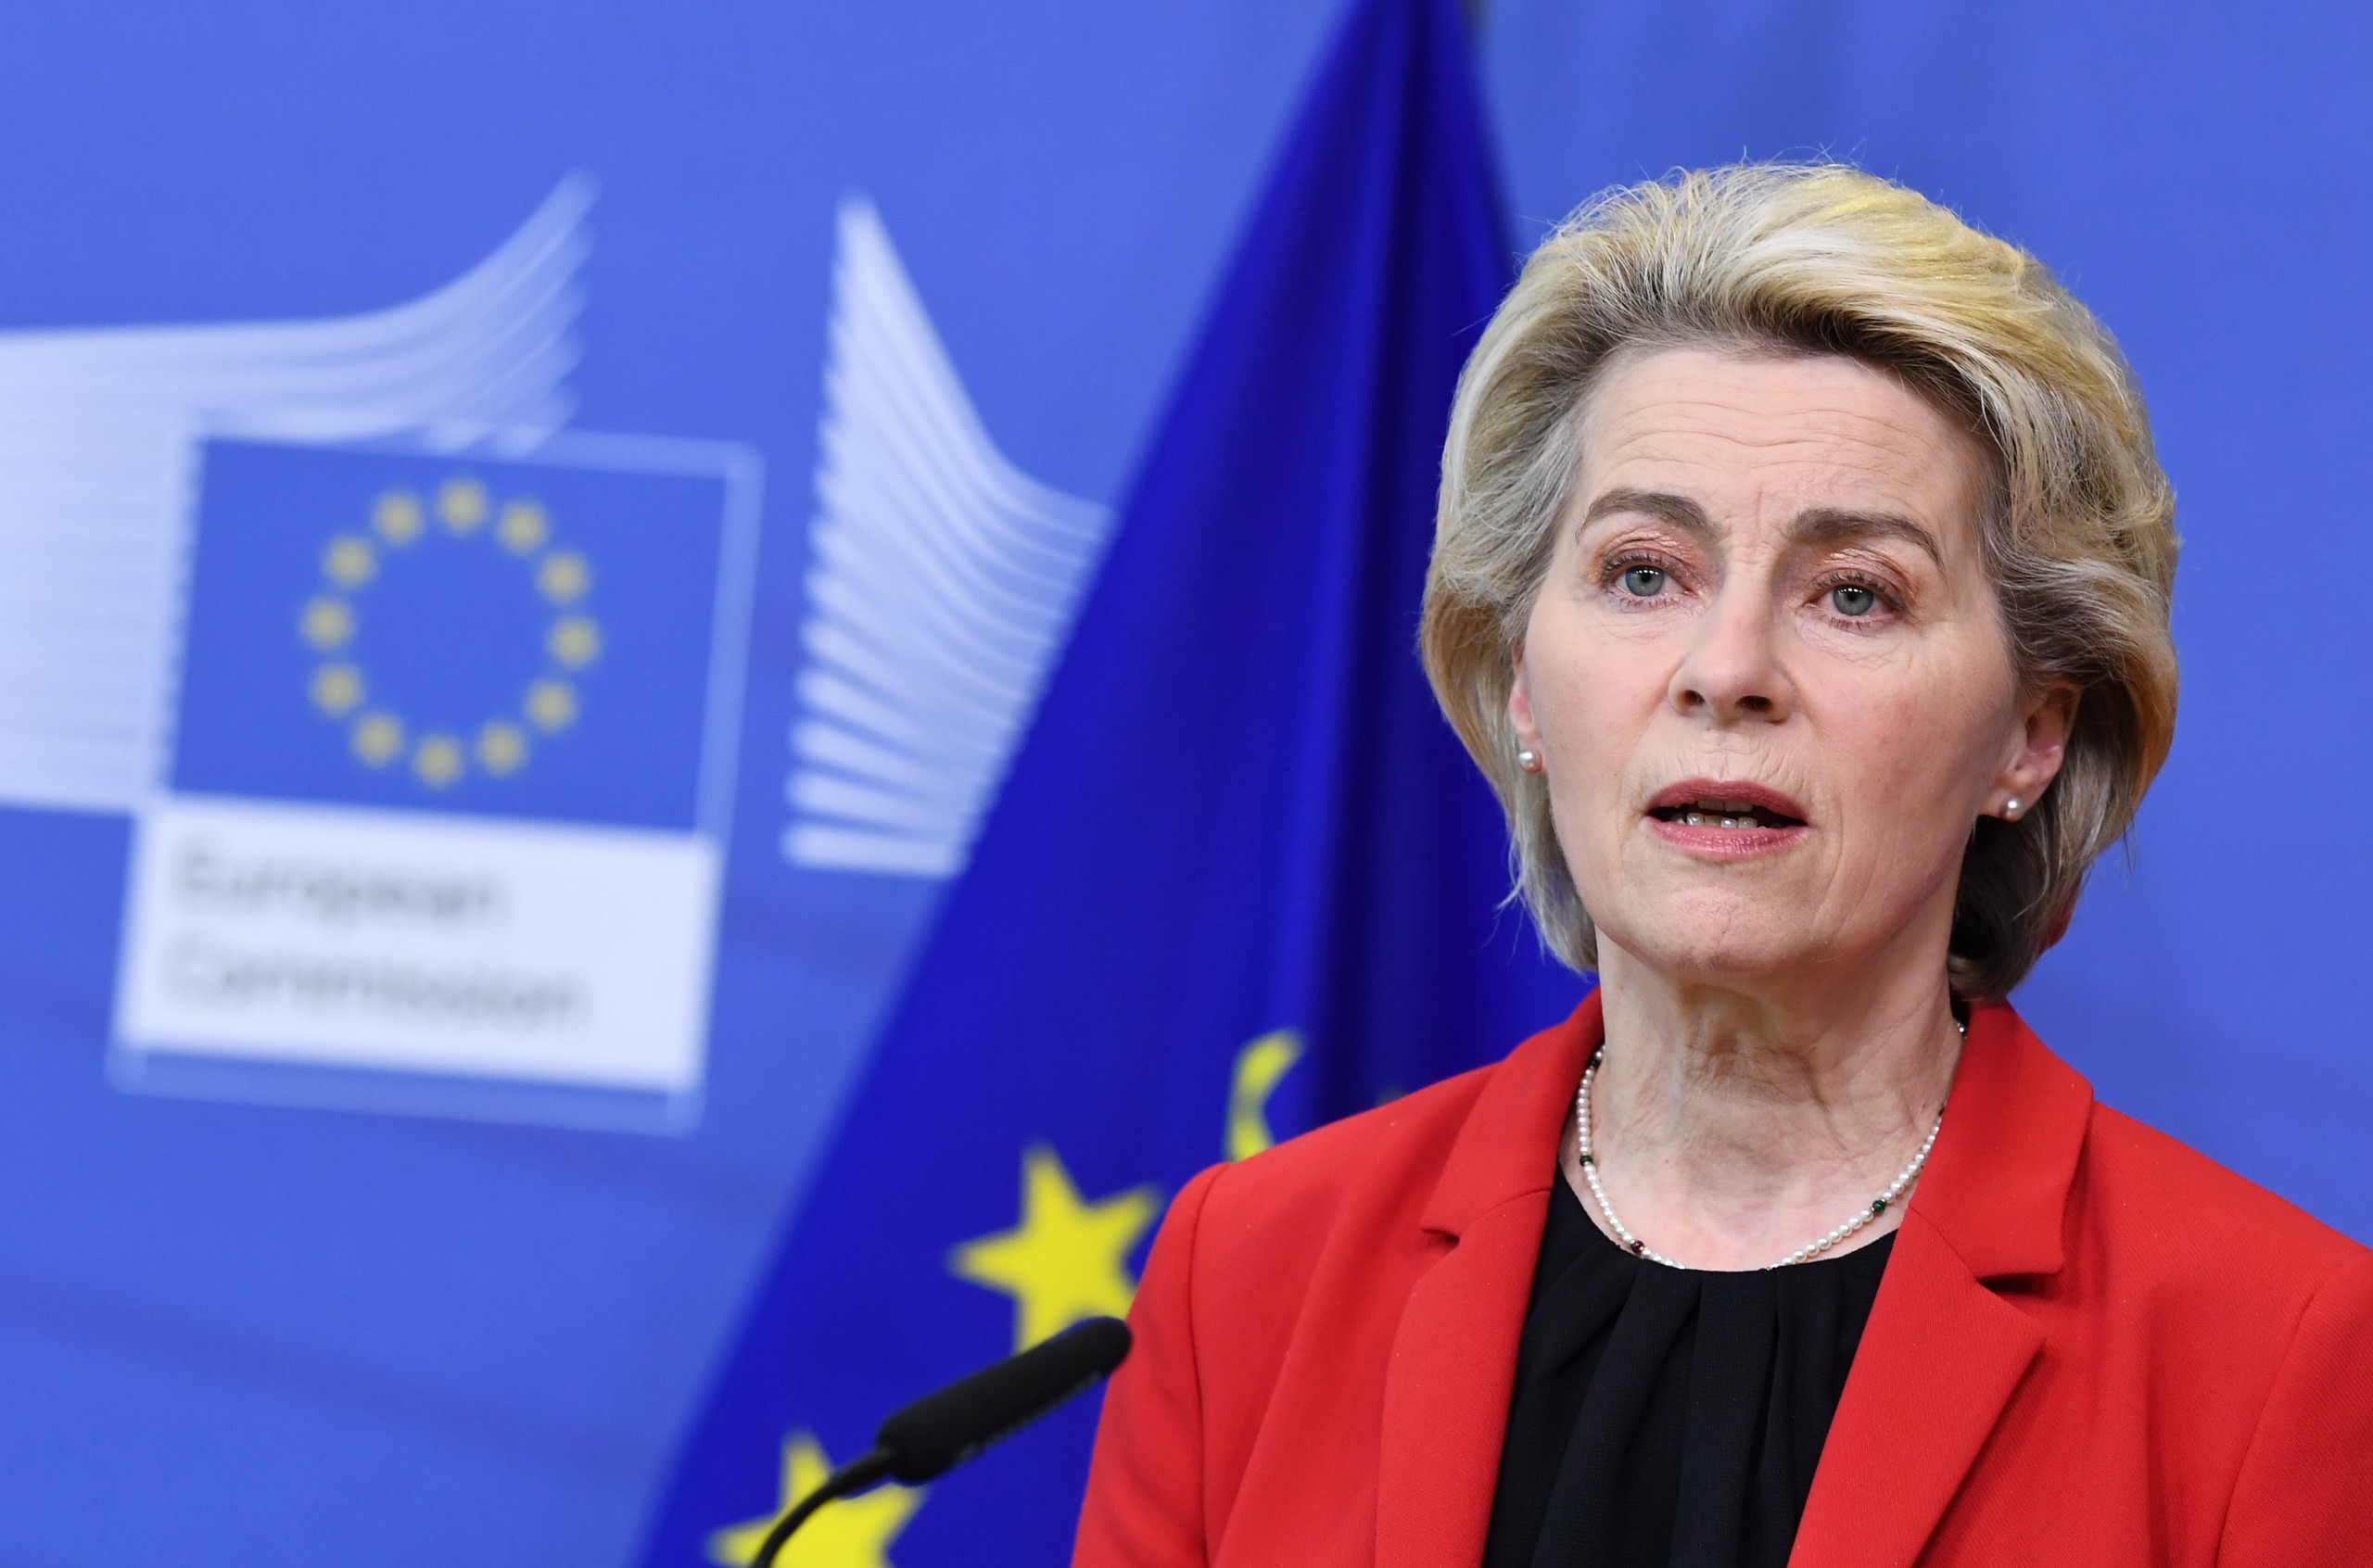 epa09706199 European Commission President Ursula von der Leyen gives a statement on Ukraine at the EU headquarters in Brussels, Belgium, 24 January 2022. The European Union aims to help Ukraine with a 1.2 billion euro financial aid package in grants and loans to mitigate the effects of the conflict with Russia, von der Leyen said.  EPA/JOHN THYS / POOL